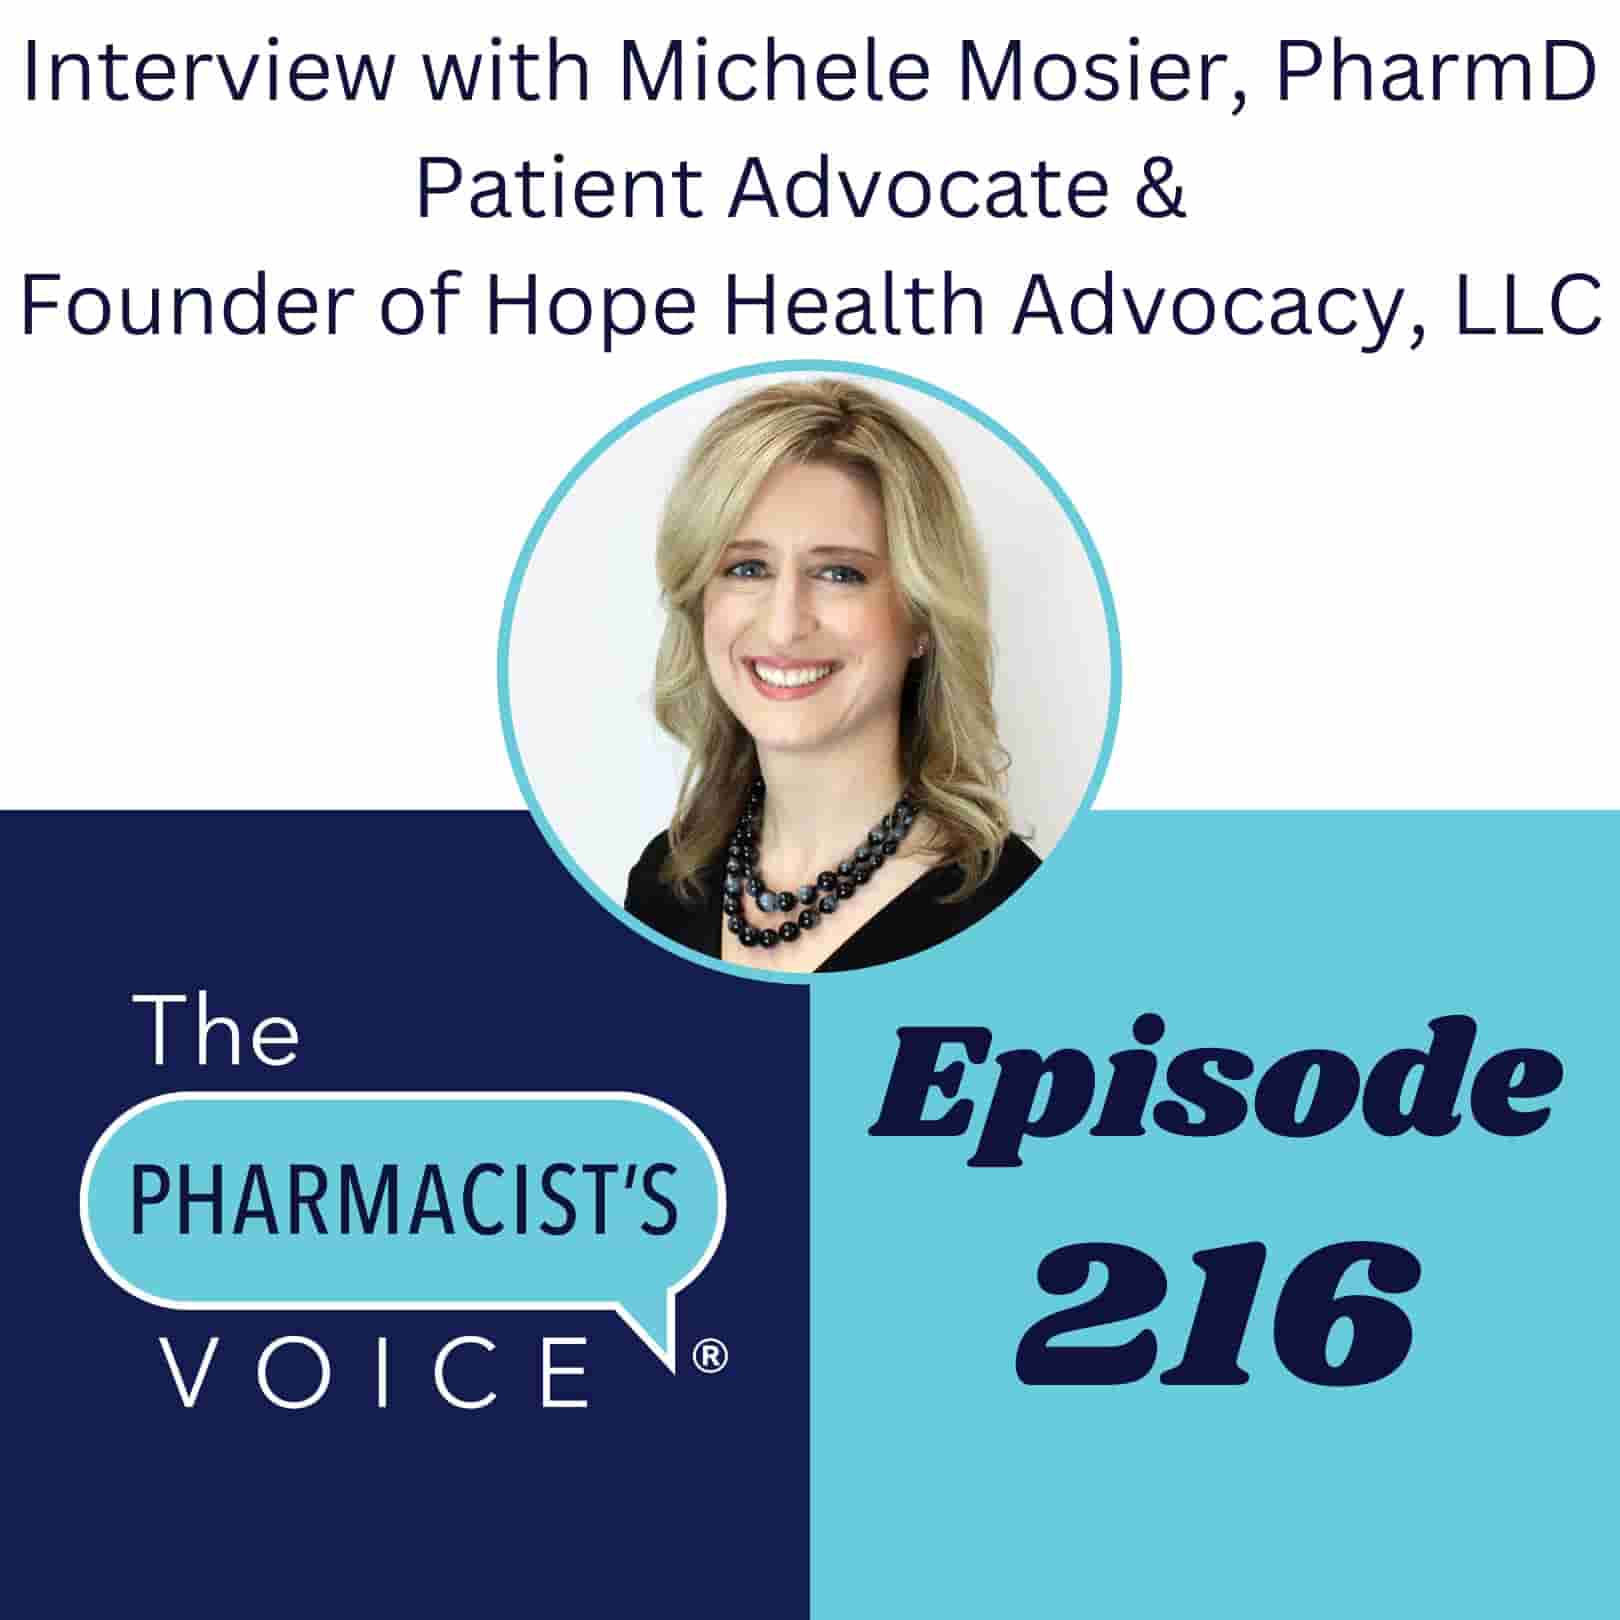 Michele Mosier is pictured in this episode artwork for The Pharmacist's Voice Podcast Episode 216. Michele has fair skin and blonde hair. She is wearing a black shirt and a black, beaded necklace.